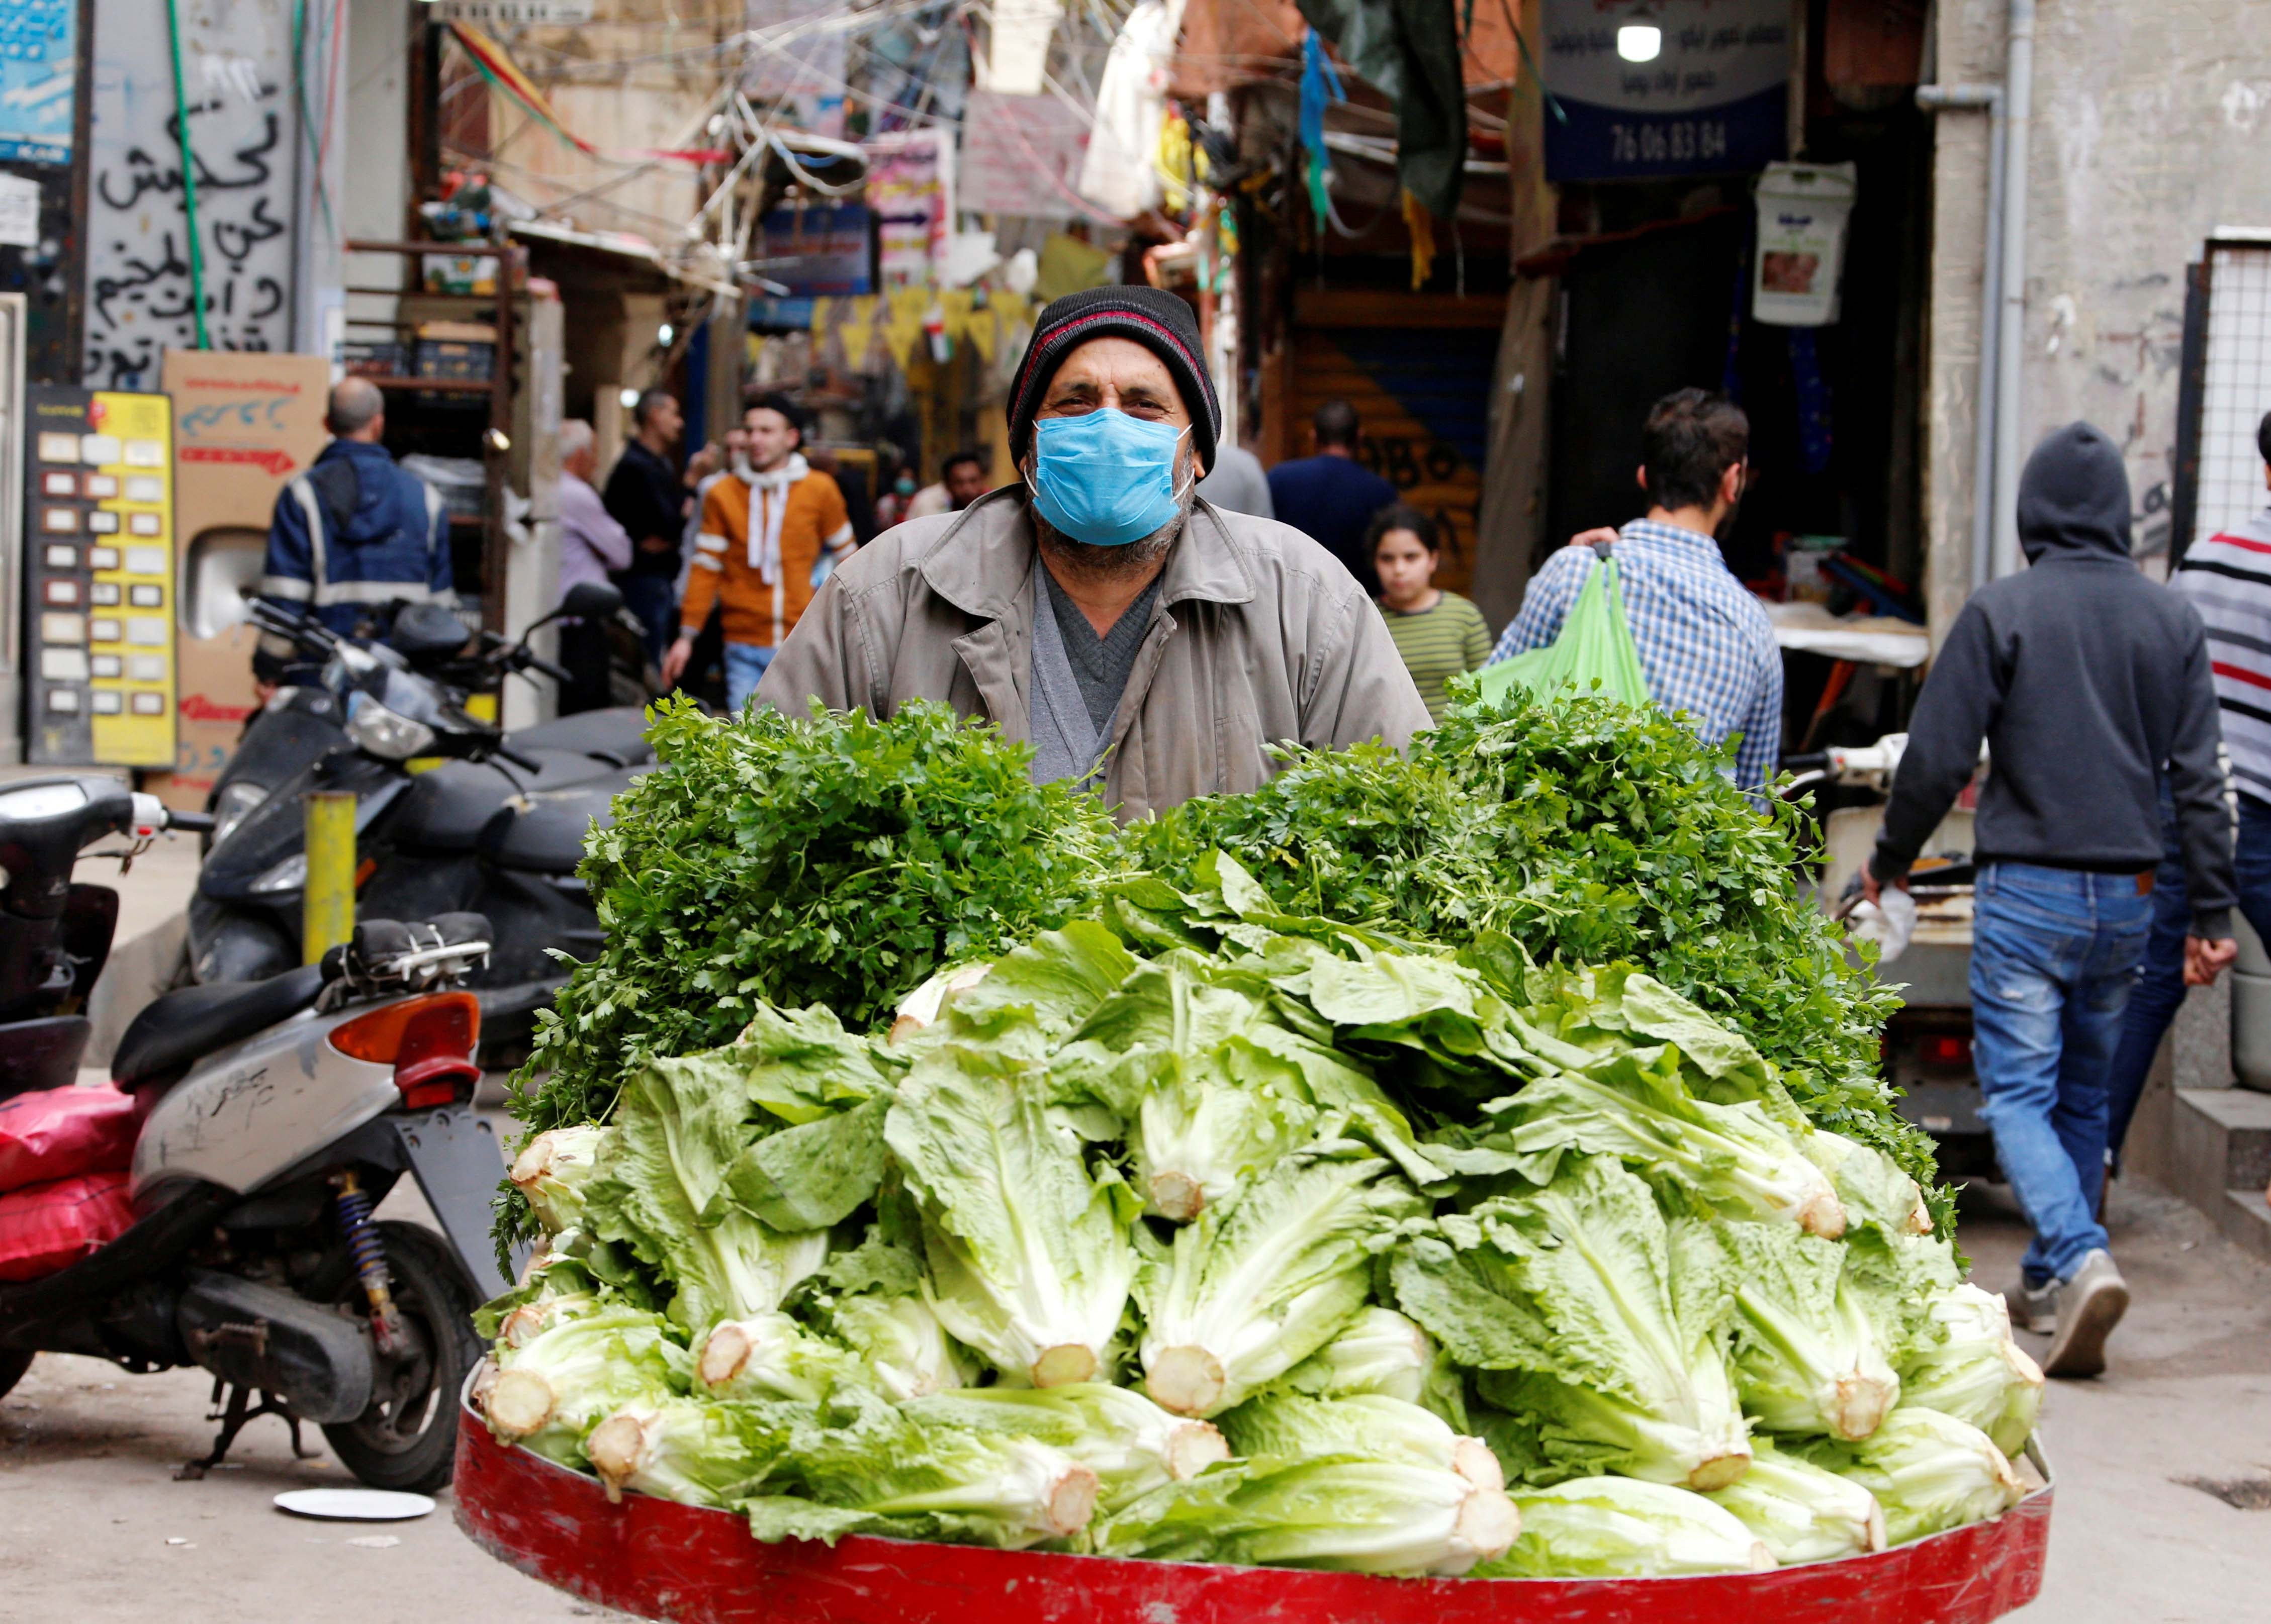 A street vendor pushes his cart in Shatila Palestinian refugee camp, wearing a face mask to try to protect against the spread of COVID-19, in Beirut suburbs, Lebanon, March 30, 2020.